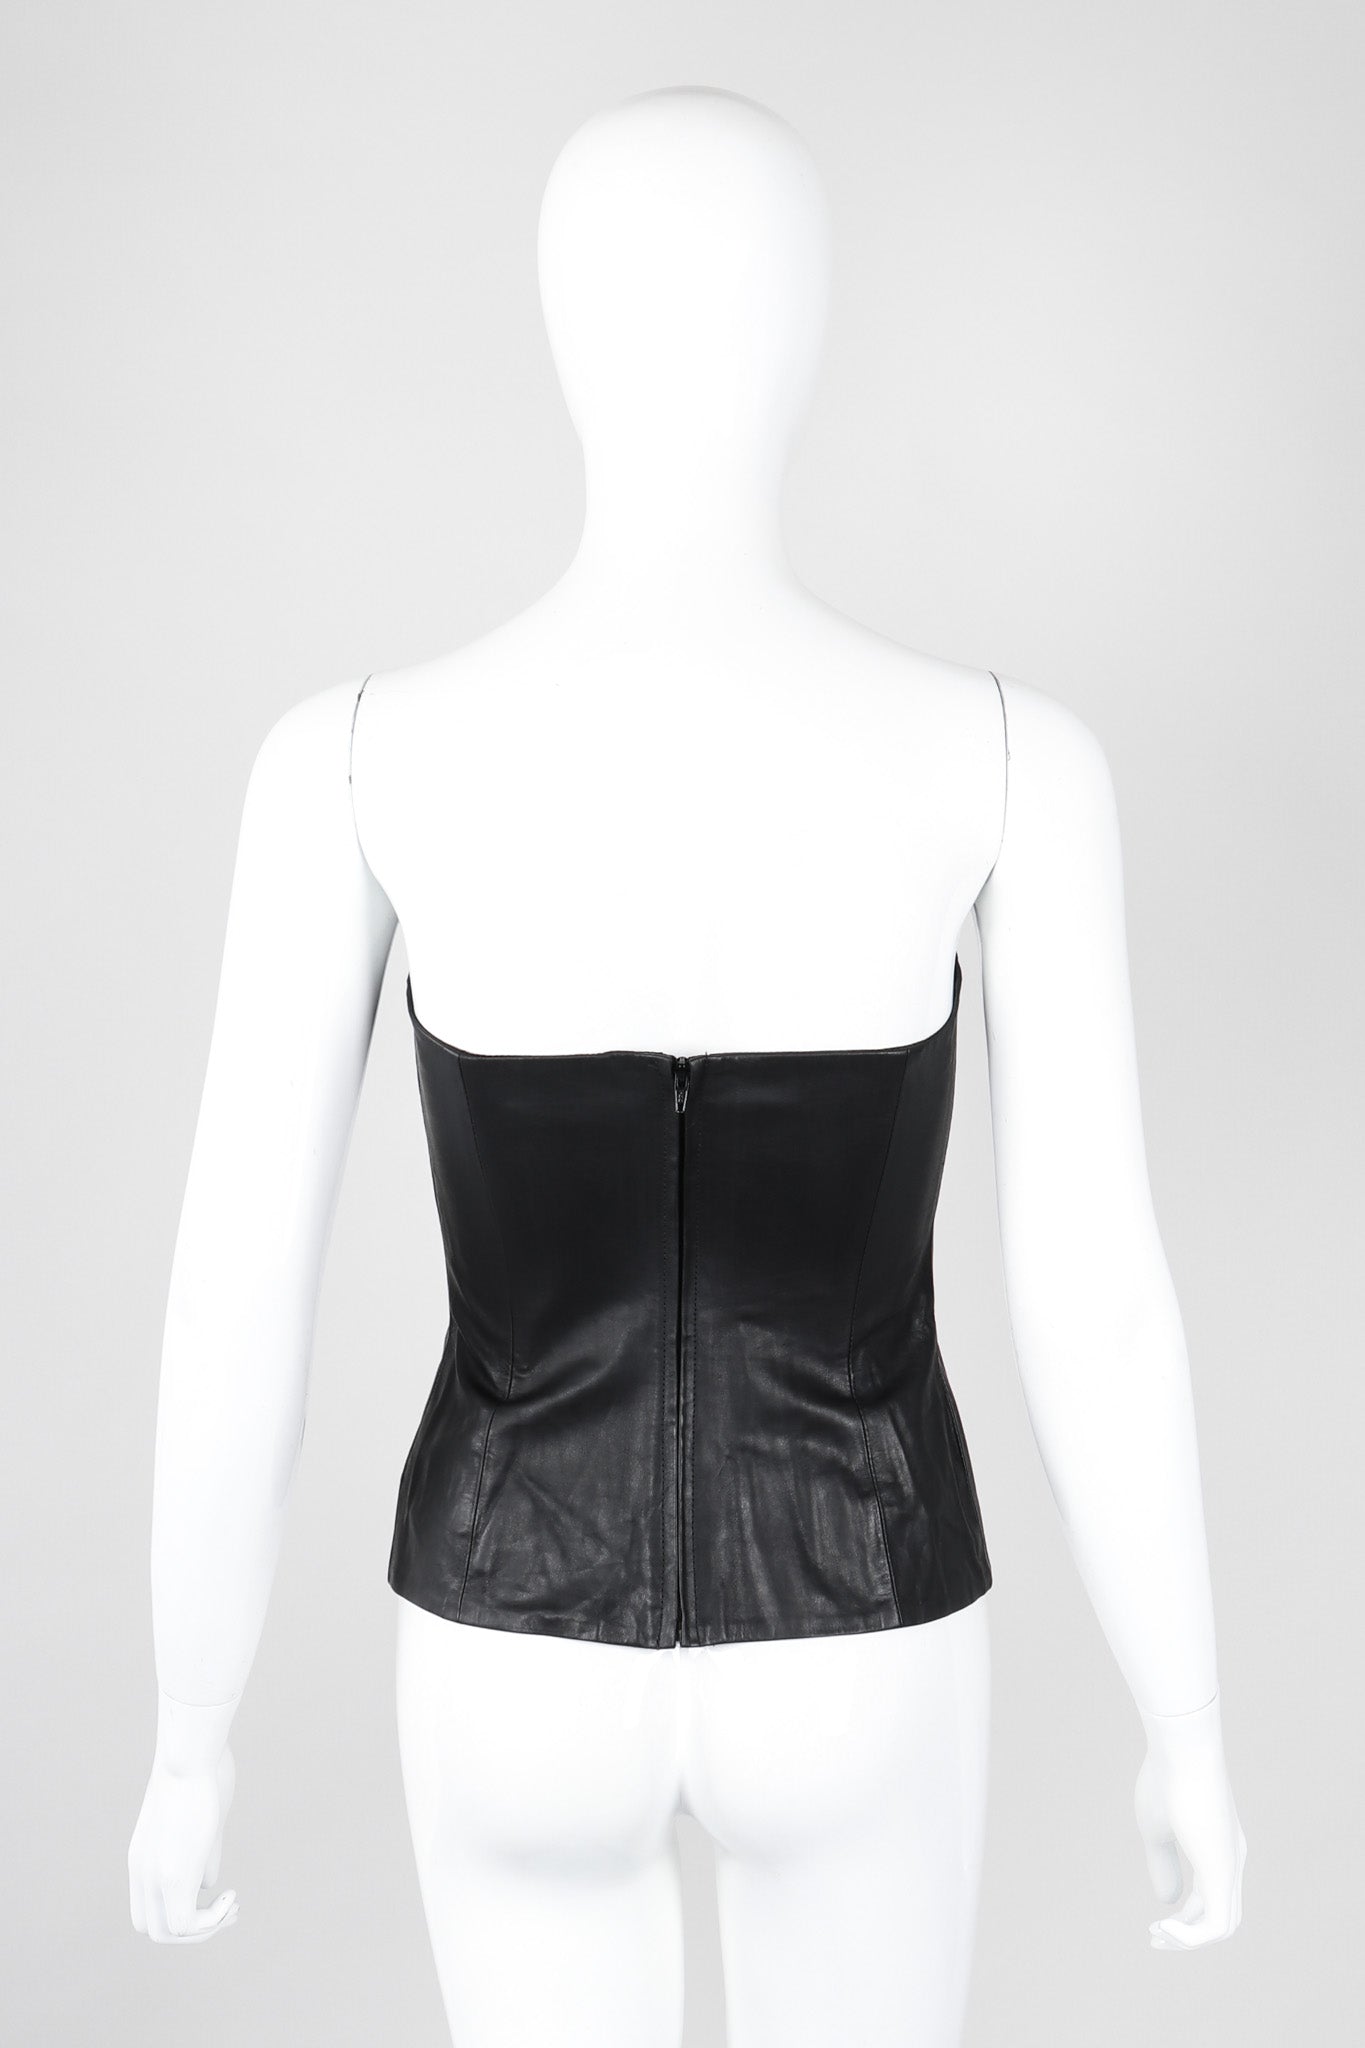 Recess Los Angeles Vintage Plein Sud 90s Strapless Leather Bustier Corset Tube Top